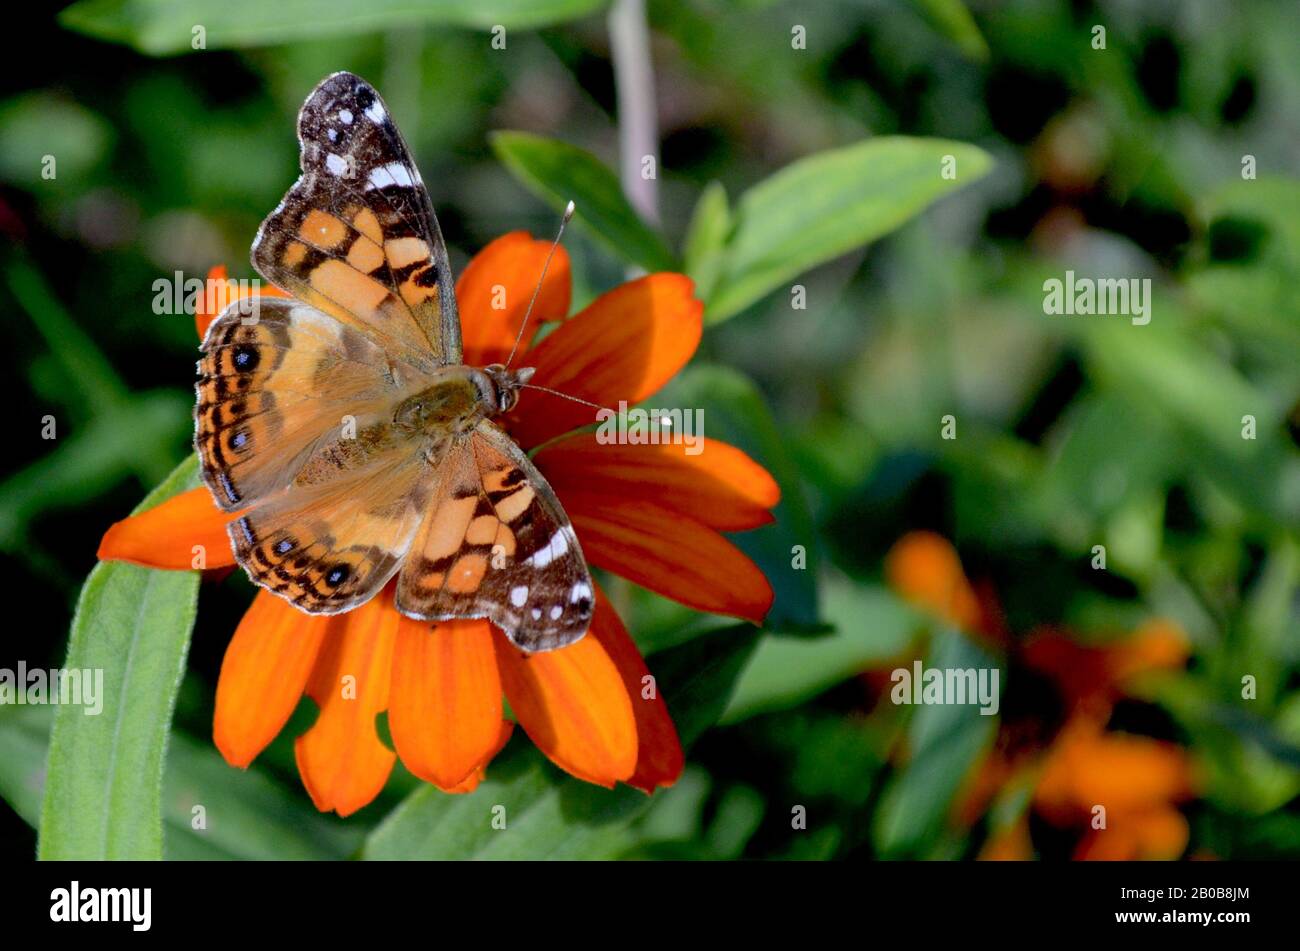 An beautiful American Lady butterfly (Vanessa virginiensis) rests on an orange zinnia flower.  Copy space. Close-up. Stock Photo